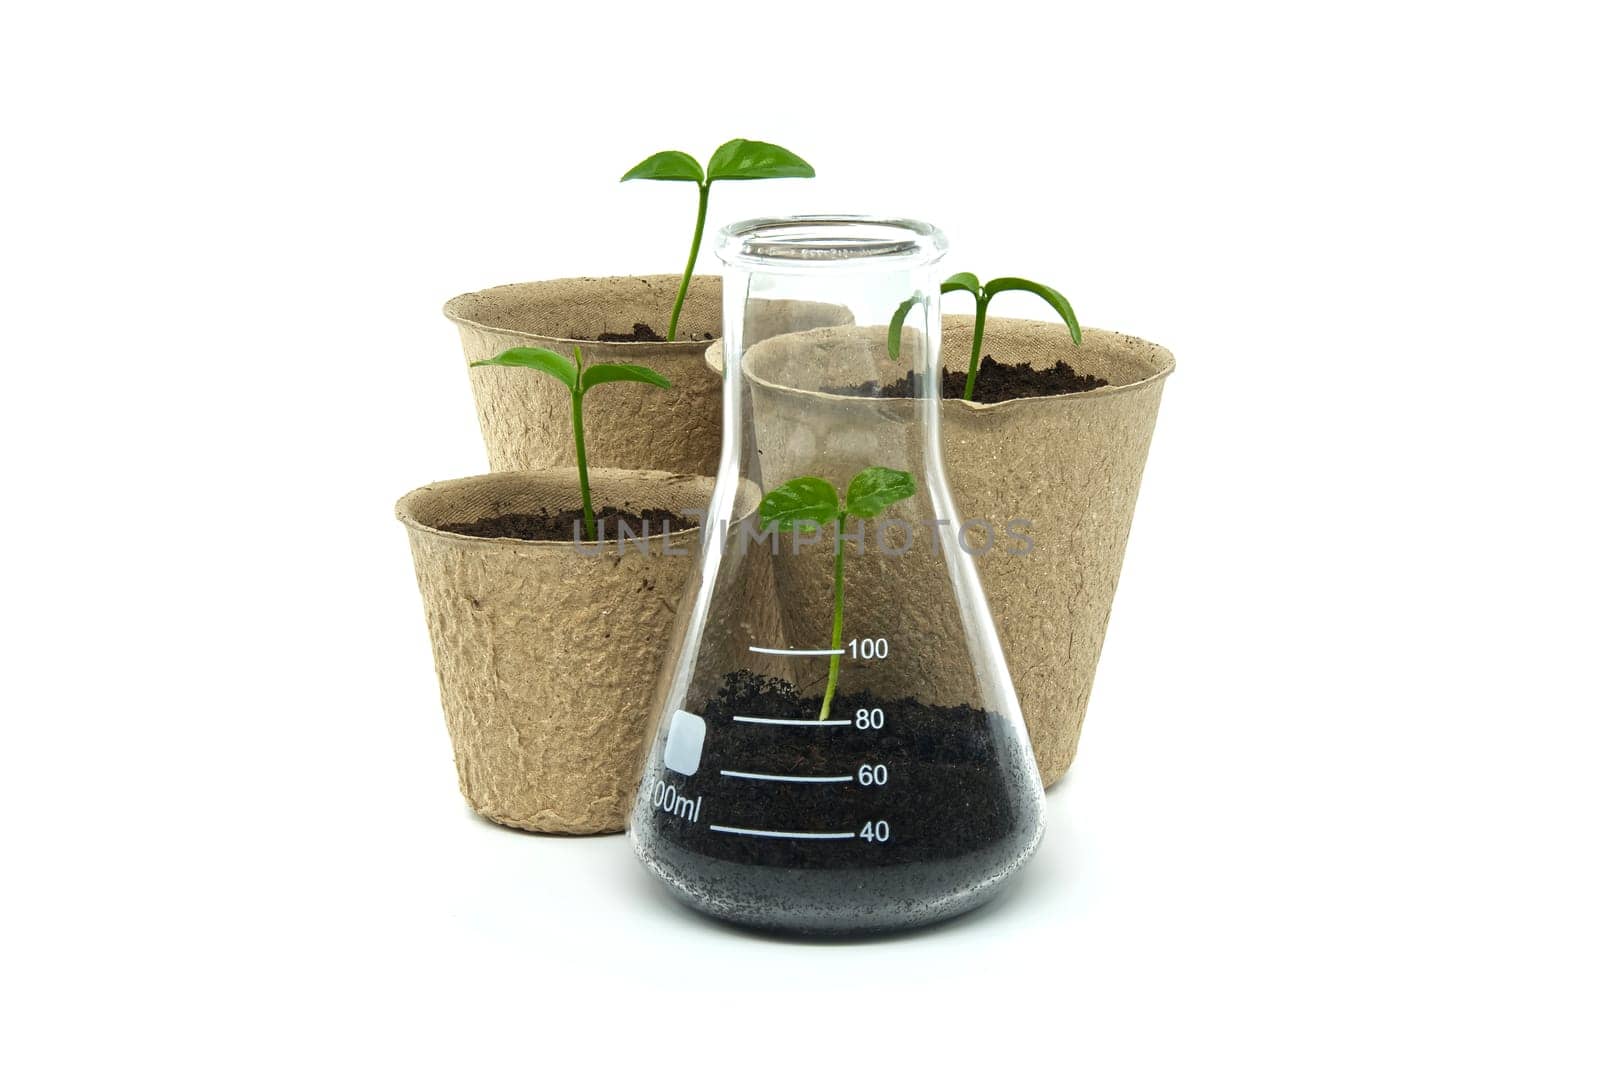 Biodegradable cups containing soil and sprouts are placed near conical glass flask, also filled with soil and featuring a slightly larger green plant